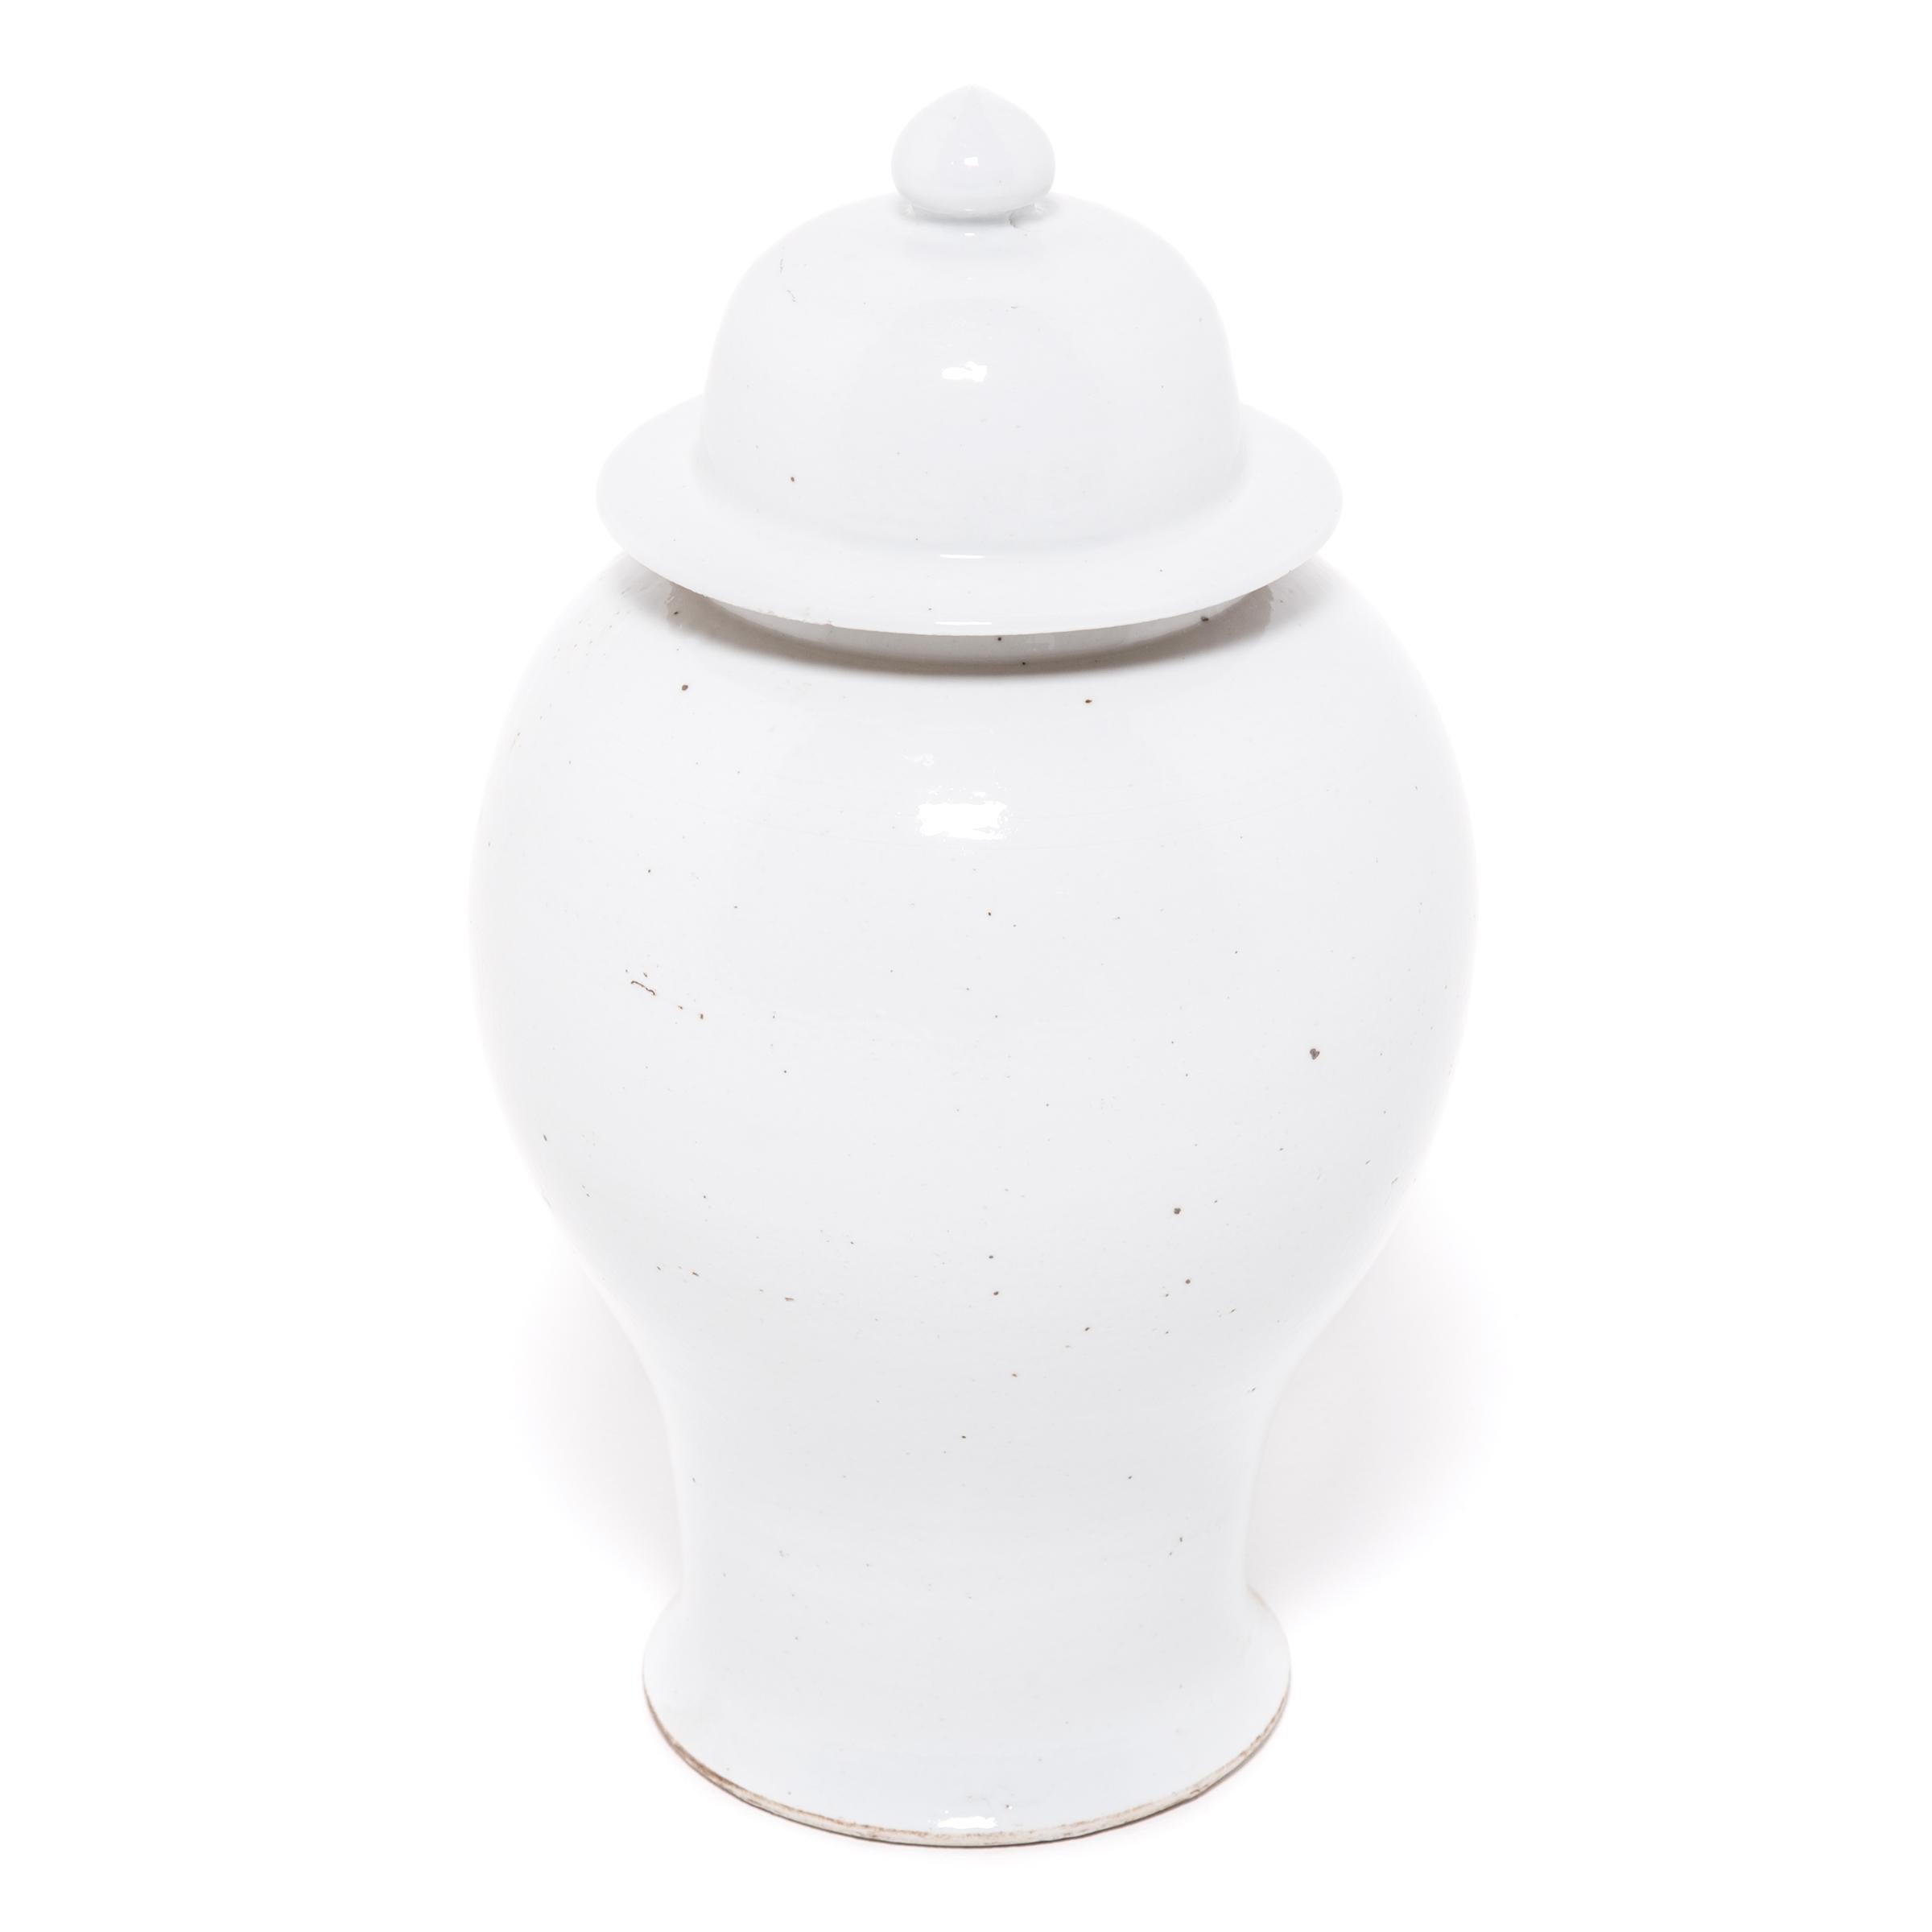 Defined by its rounded body, high shoulders, and domed lid, the time-honored Chinese baluster jar takes on a streamlined look in this contemporary interpretation made in Zhejiang province. Traditionally elaborately decorated, this modern take is